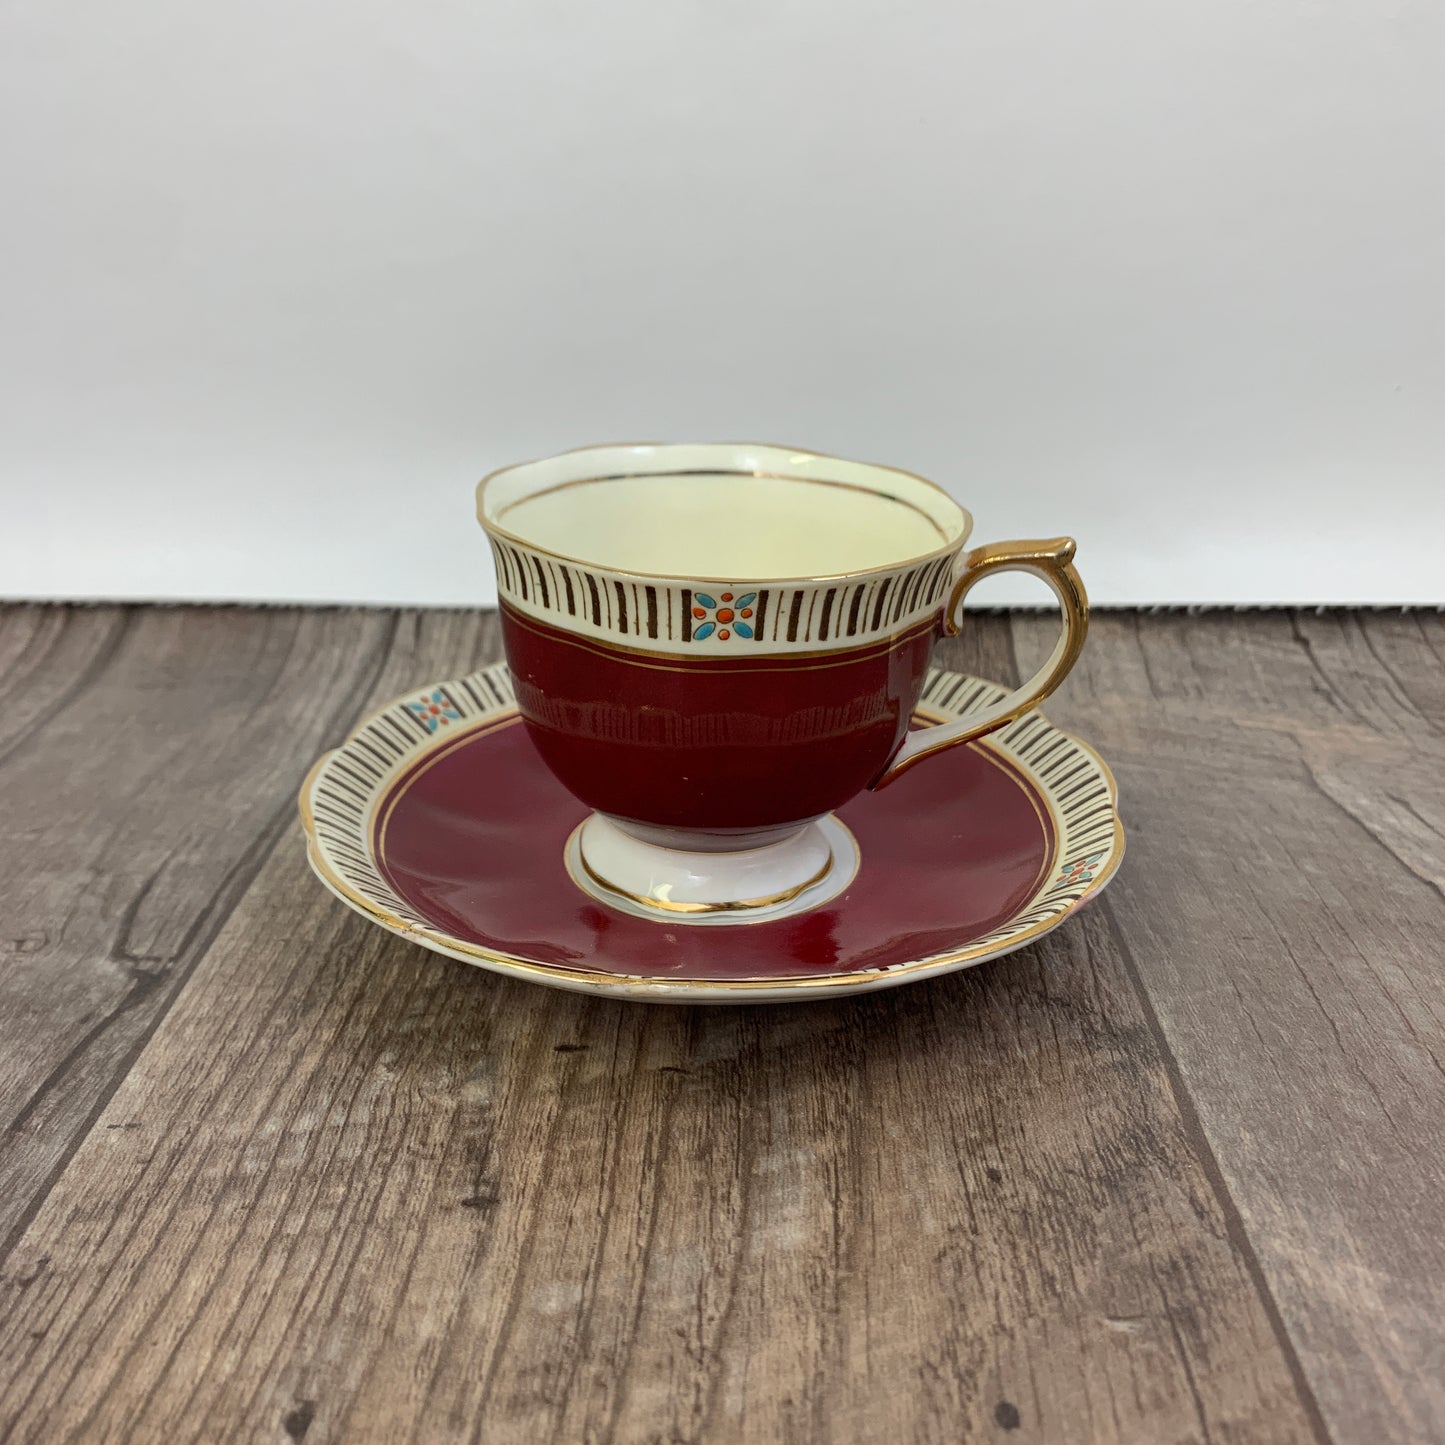 Burgundy Hand Painted Royal Albert Tea Cup, Gifts for Mom, Hand Painted Vintage Teacup